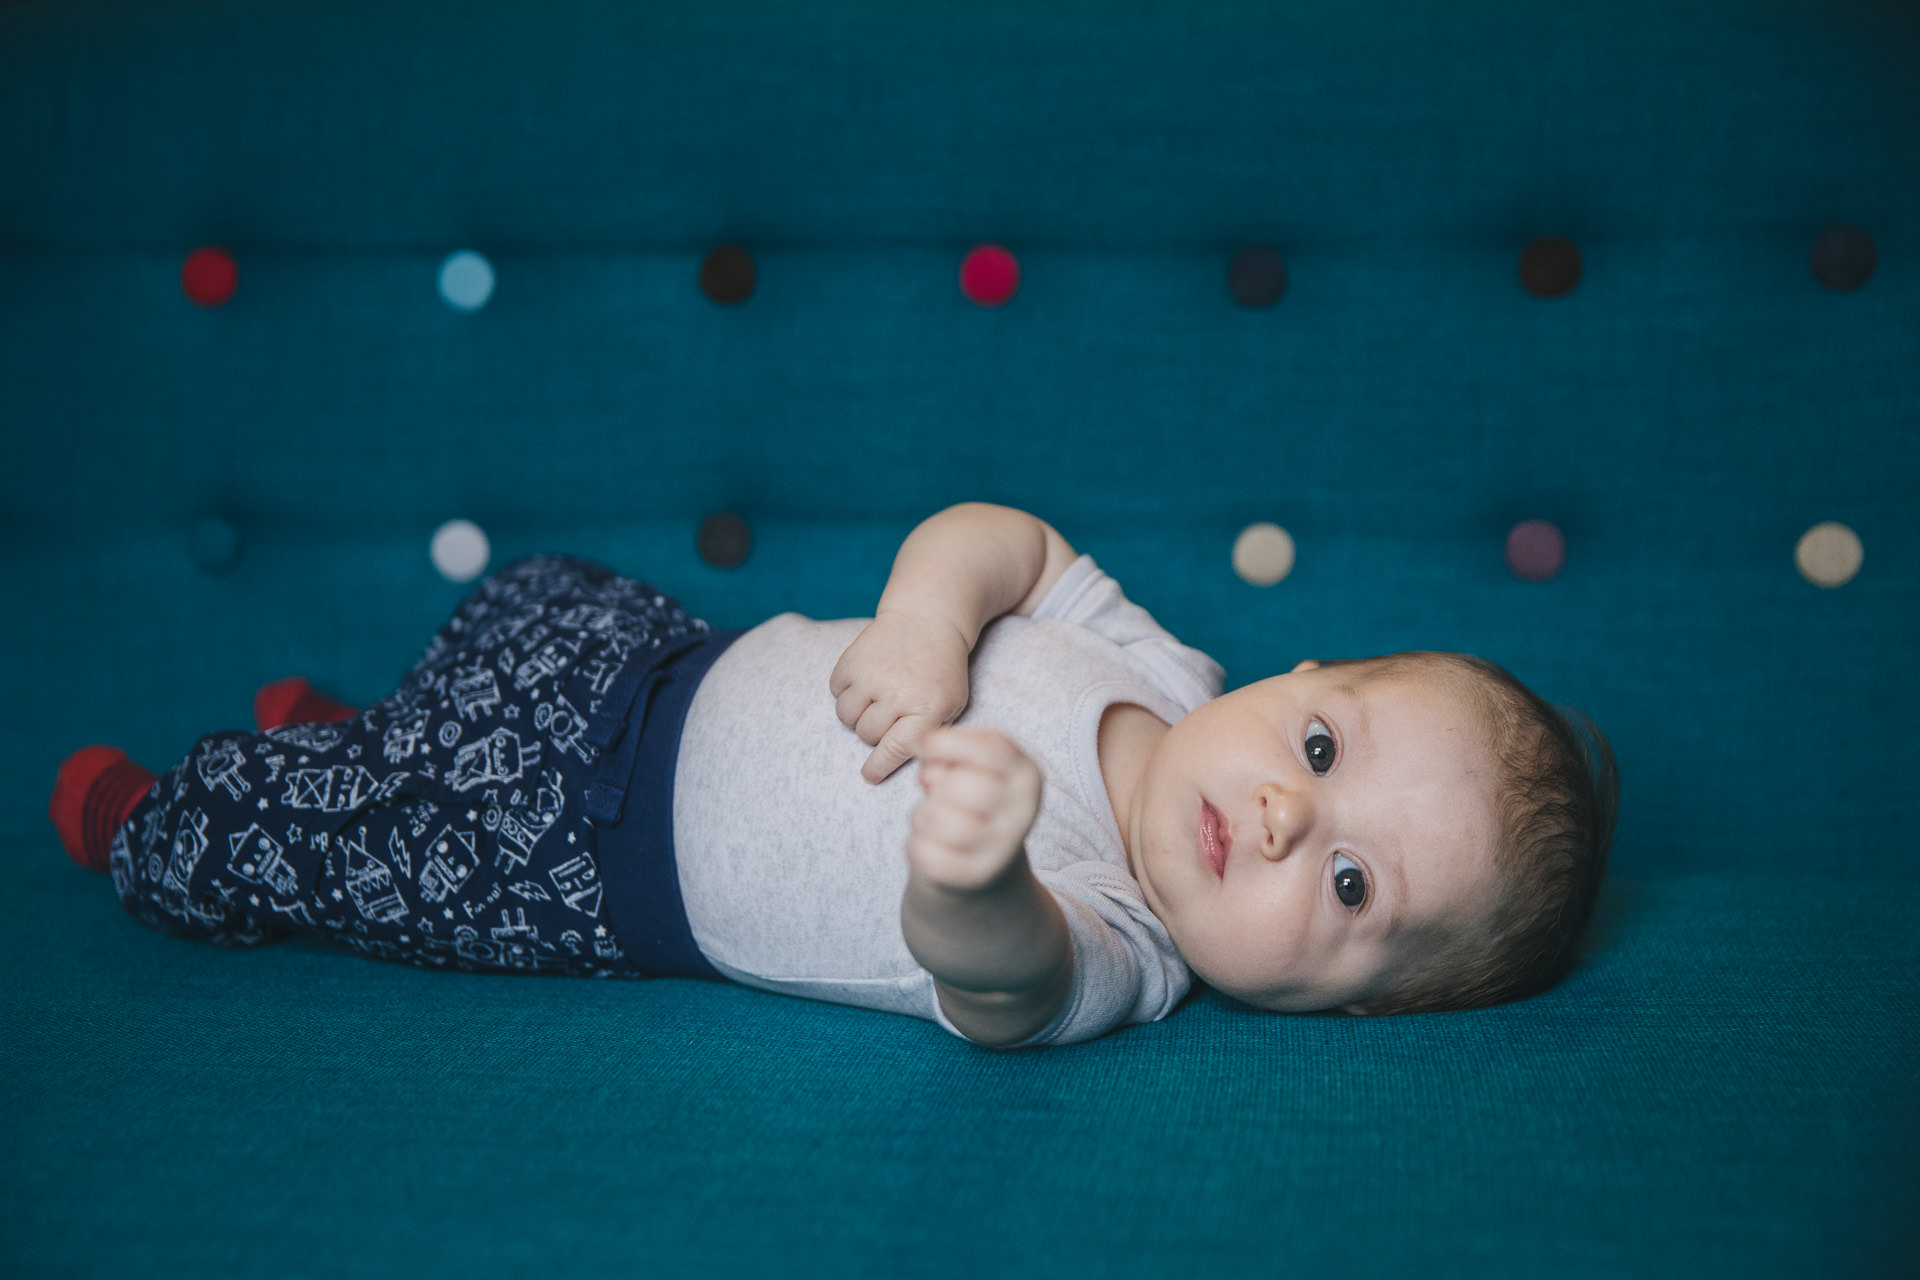 Relaxed family photos at home of a small baby on a stylish blue sofa